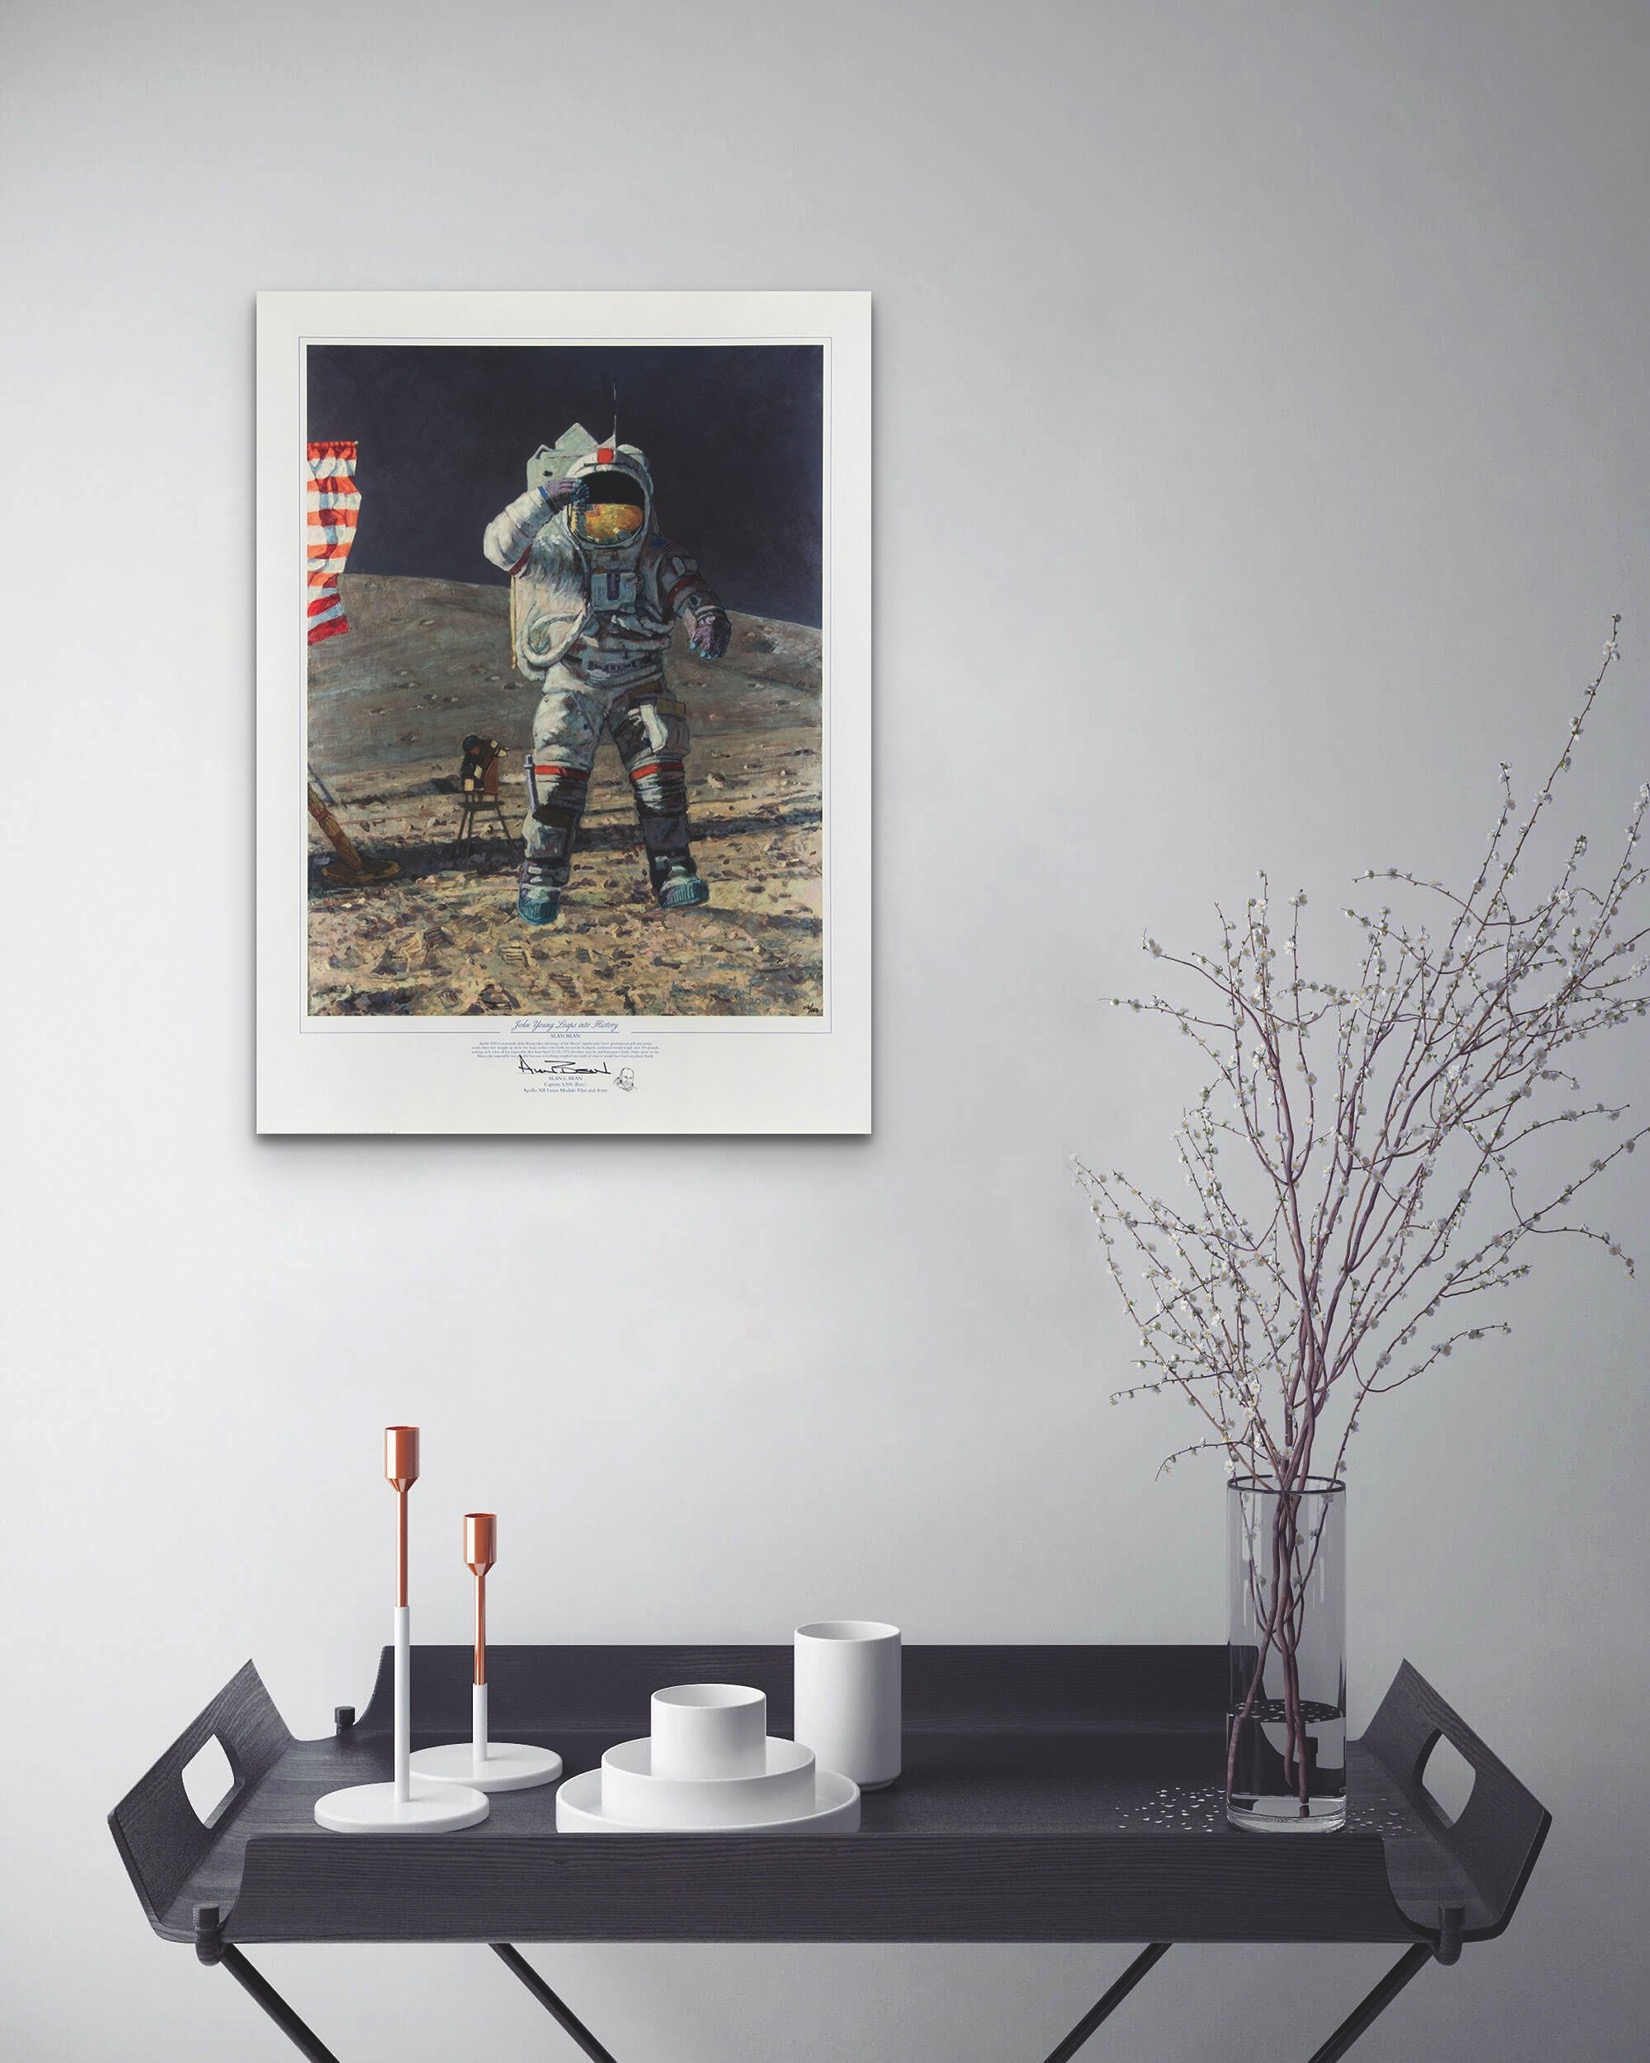 Lot #7507 Alan Bean Signed Giclee Print: 'John Young Leaps into History' - Image 4